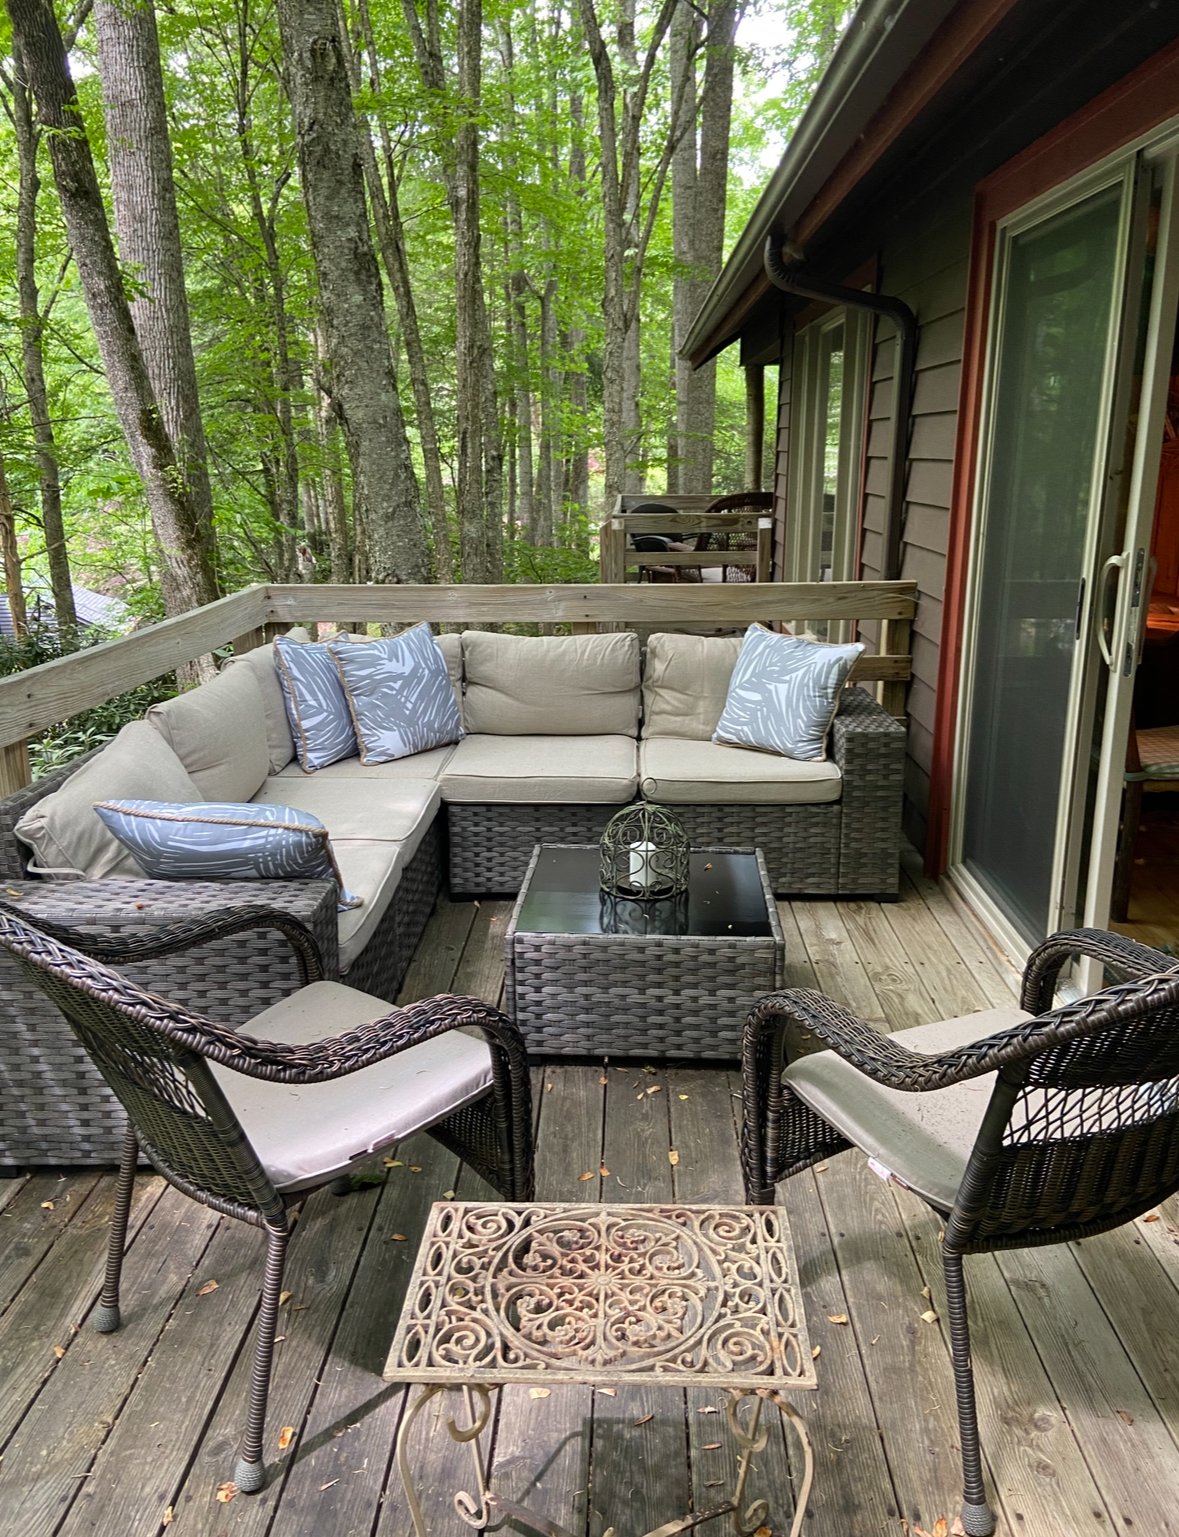 Outdoor Seating on the Back Deck Over the Flowing Creek